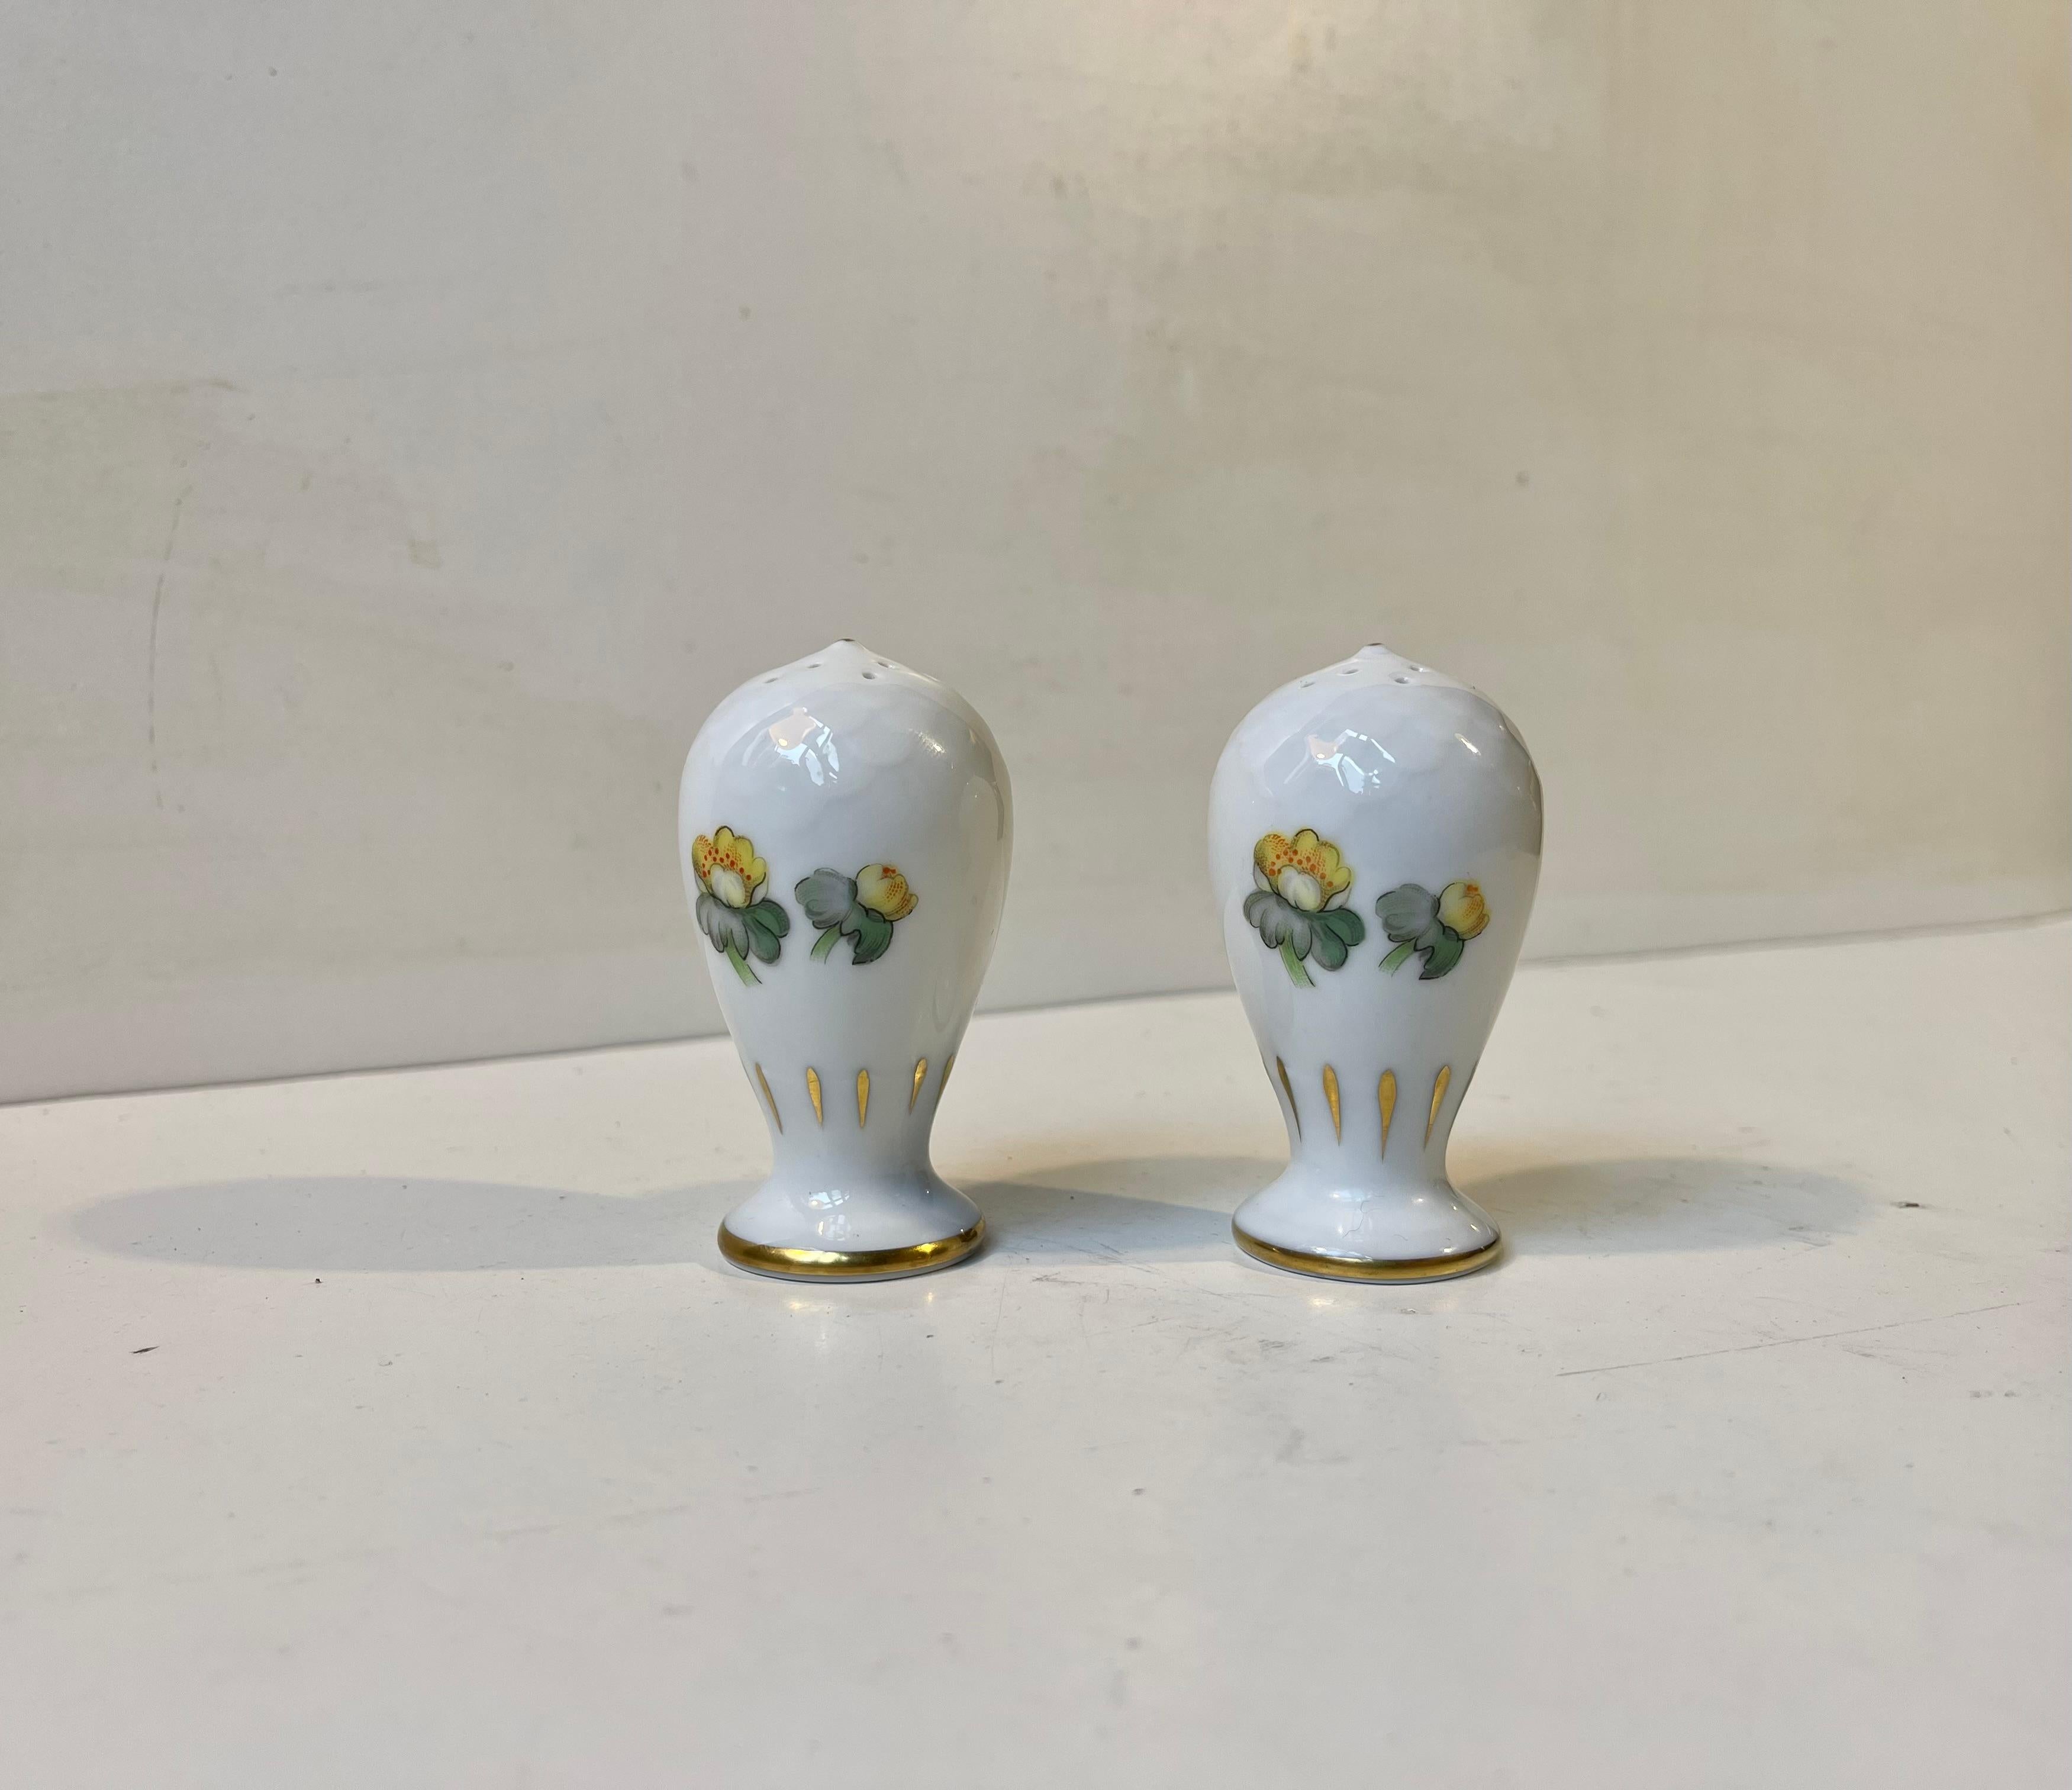 A organically shaped set of porcelain shakers called Erantis or Errant by Bing & Grondahl, Denmark. They feature Hand-painted errant flowers and gold glaze. Fully marked, original and intact - clean conditions. Measurements: H: 7.5 cm, D: 4 cm. The